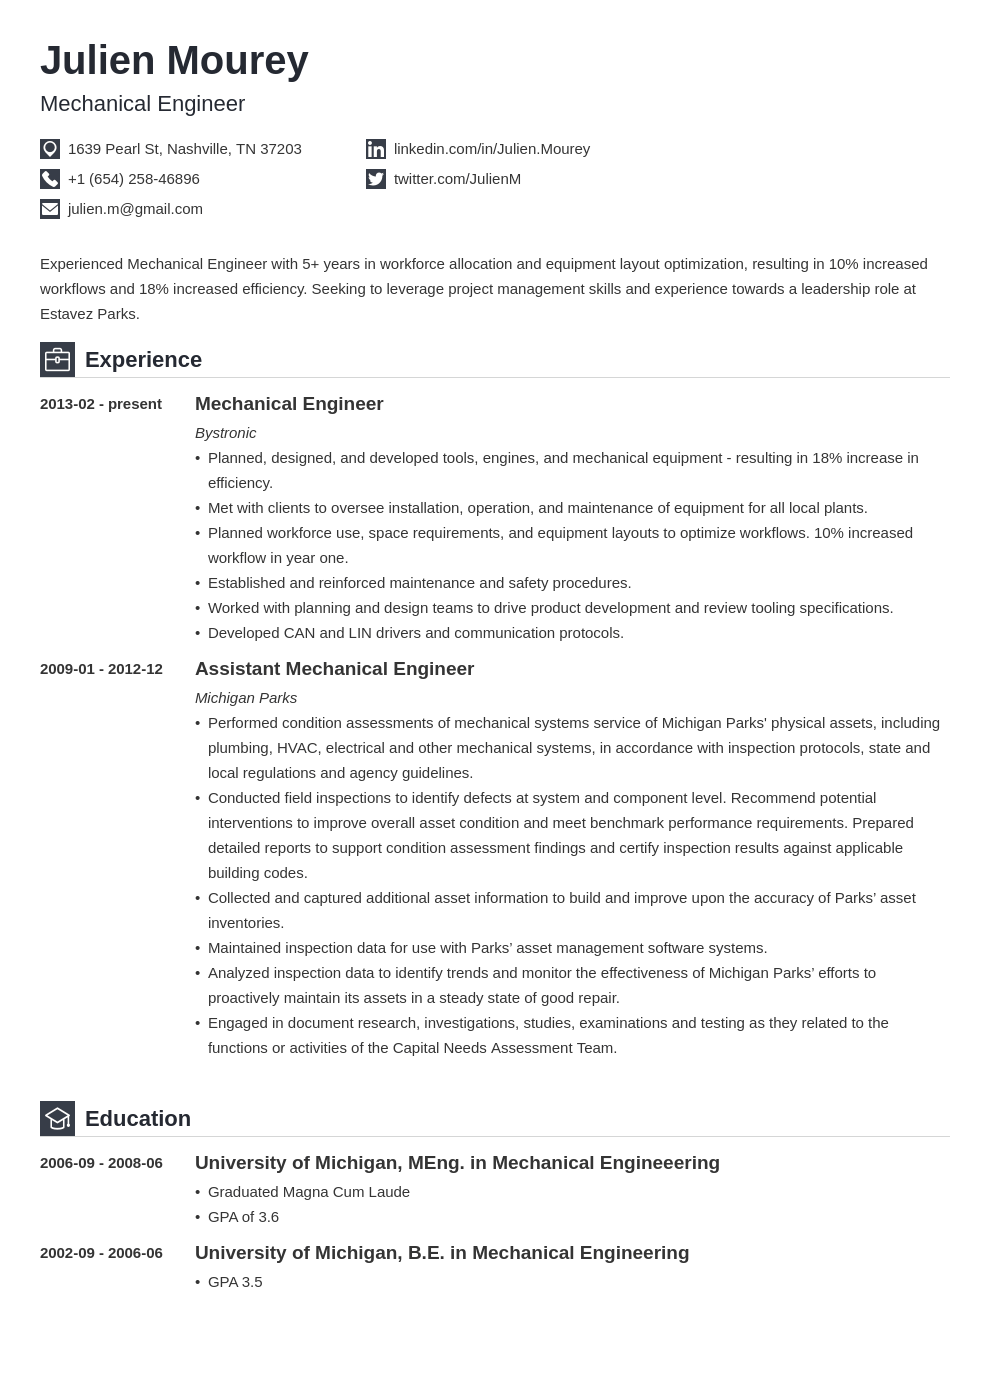 2 Year Experience Resume Format from cdn-images.zety.com